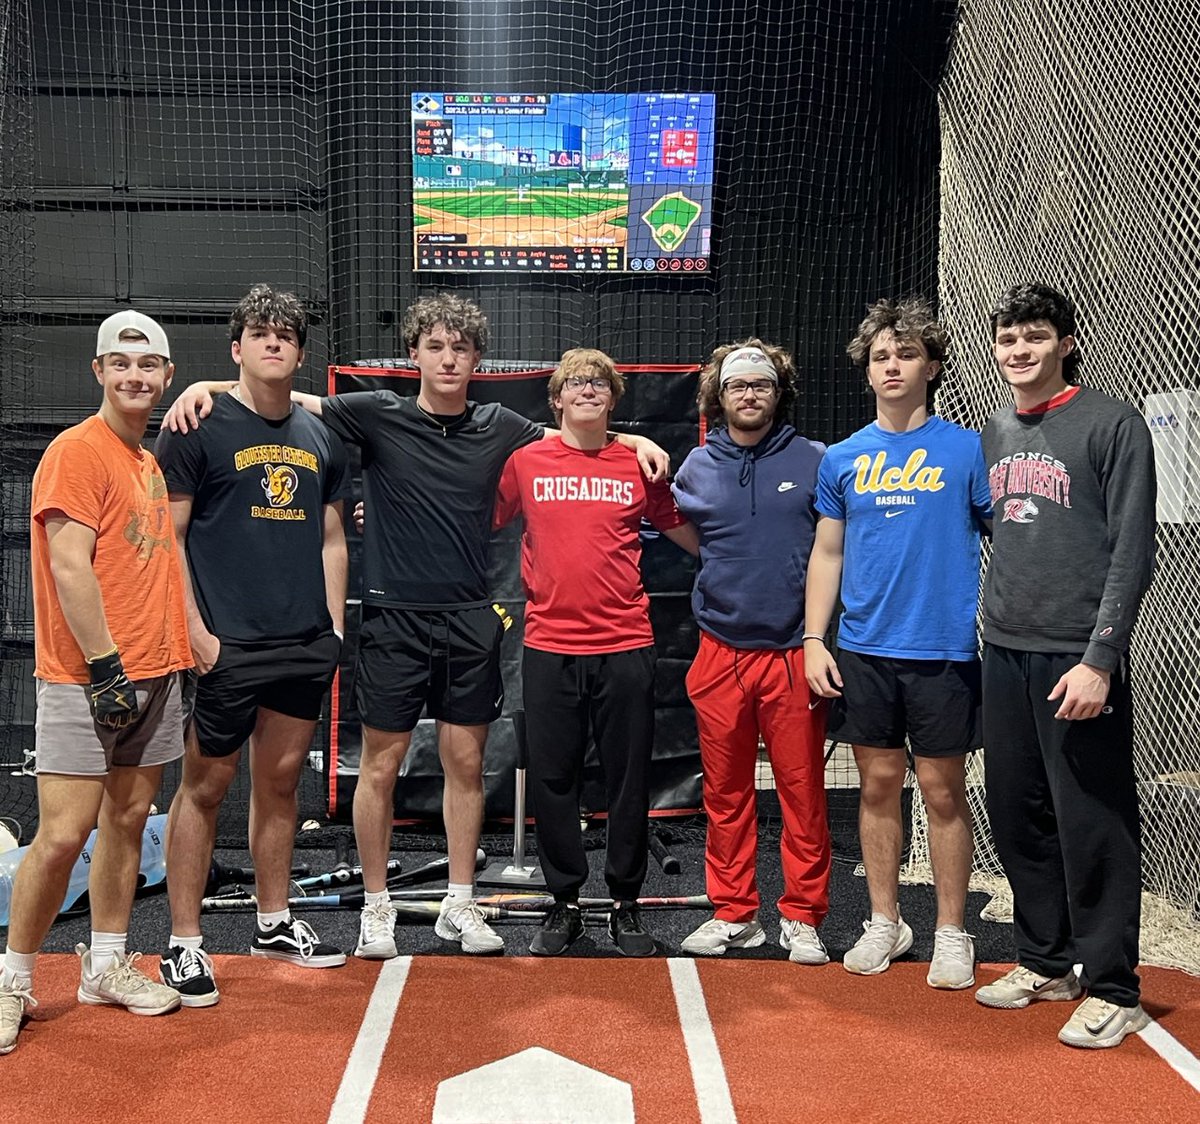 It’s been a pleasure workin w Mike and a few of the Delsea and GC dudes the last couple off seasons. @DelseaB is goin to be really good 🫡
Pictured L/R: 
@BraedenLipoff23 
@josephvacc9 
@noahdanza 
@frankiemaster5 
@ZMaxwell06 
@GuyLynam27
@mikemcginley23